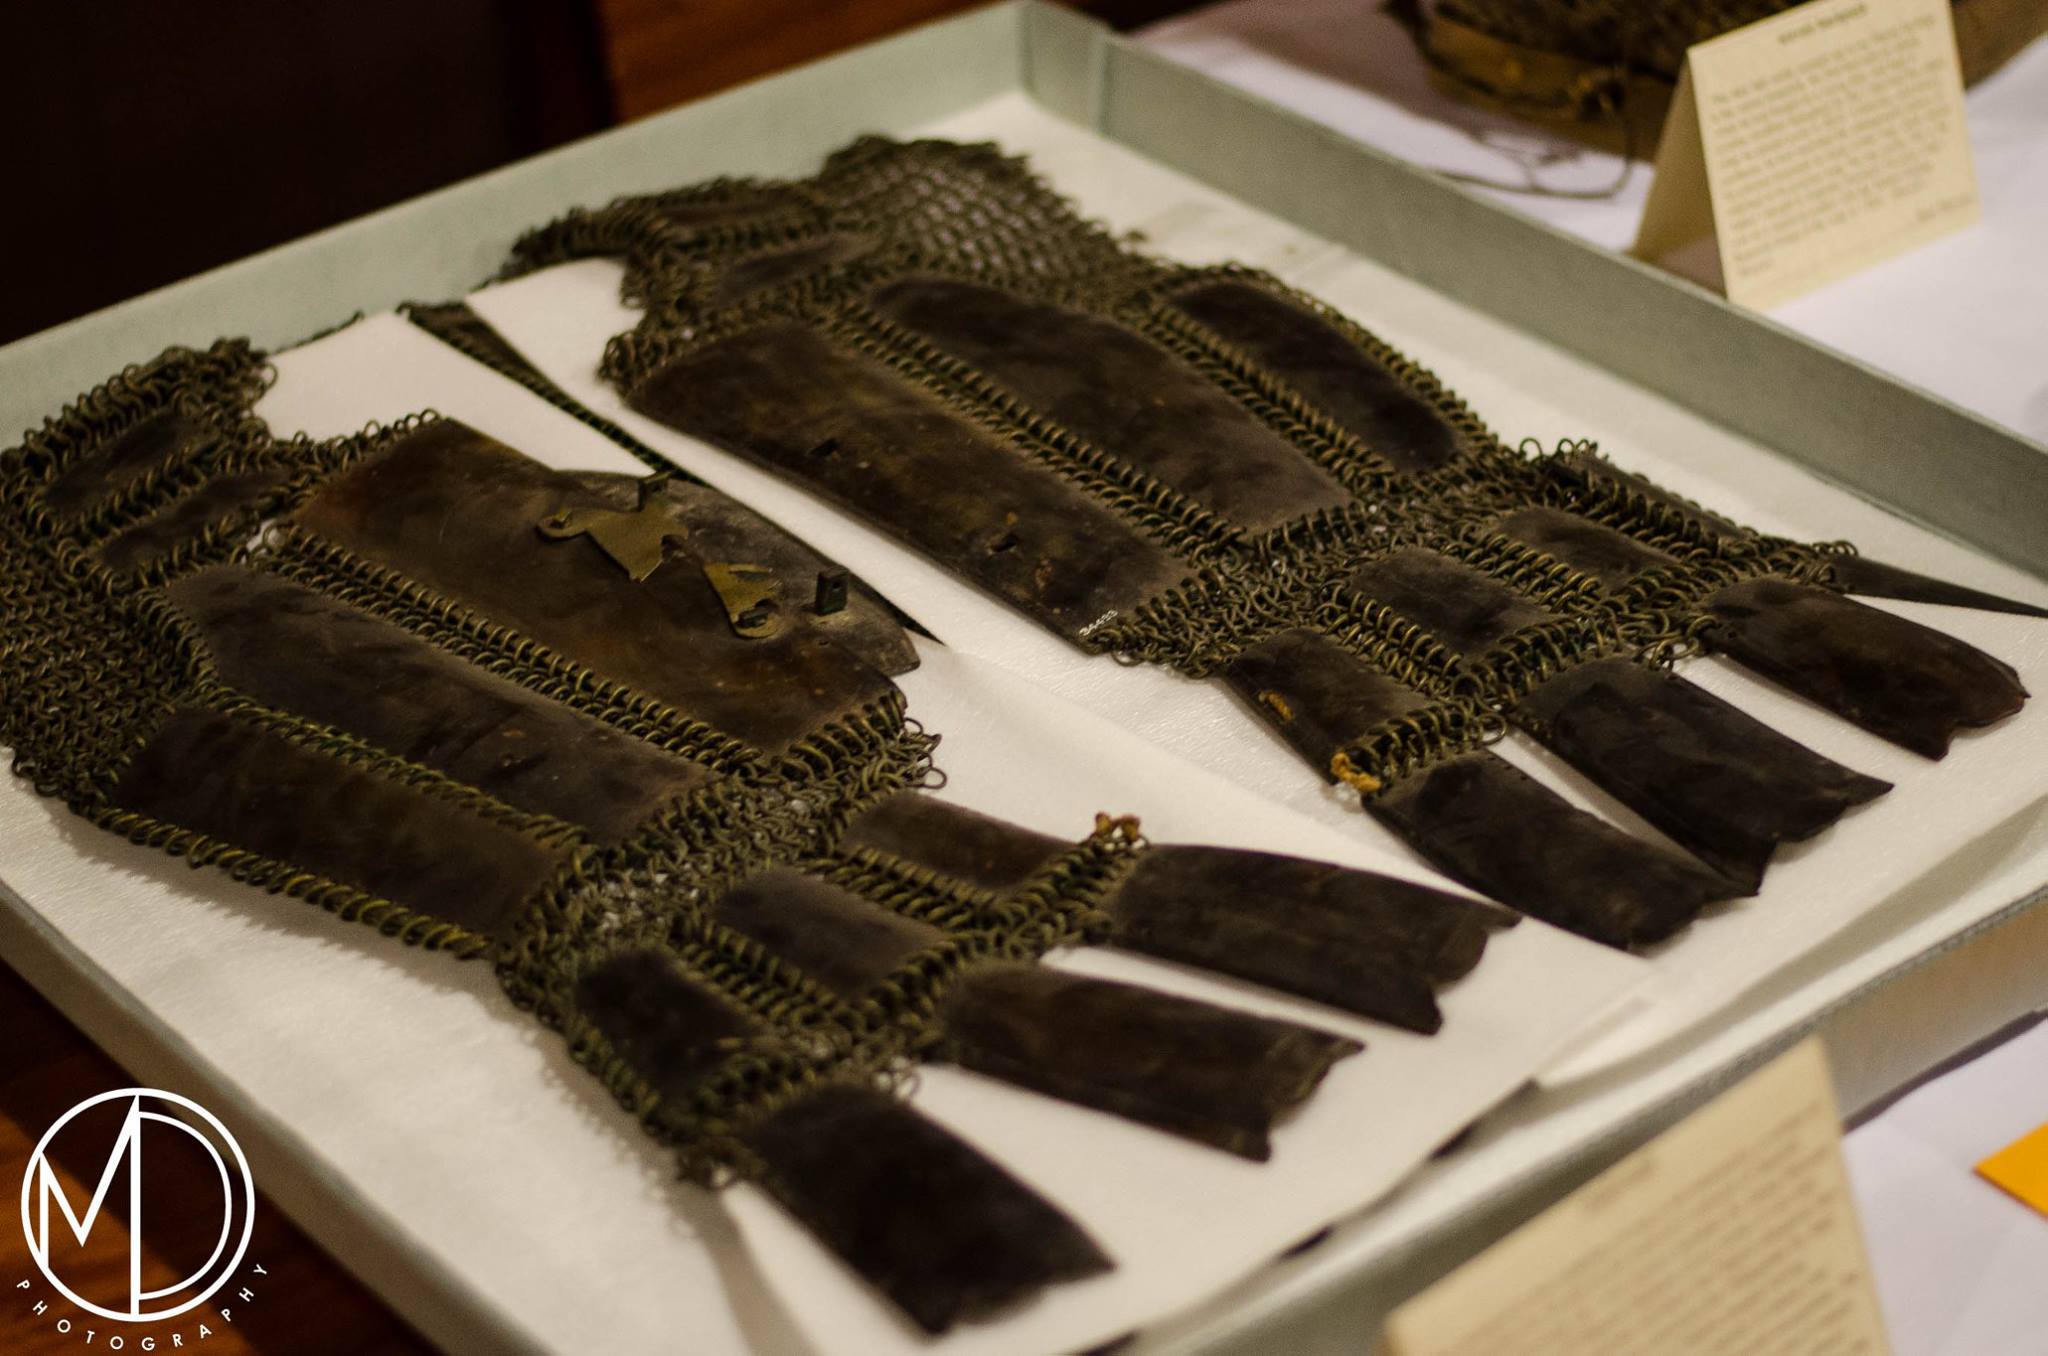 Close up of armor on the display tables. (c) Field Museum of Natural History - CC BY-NC 4.0